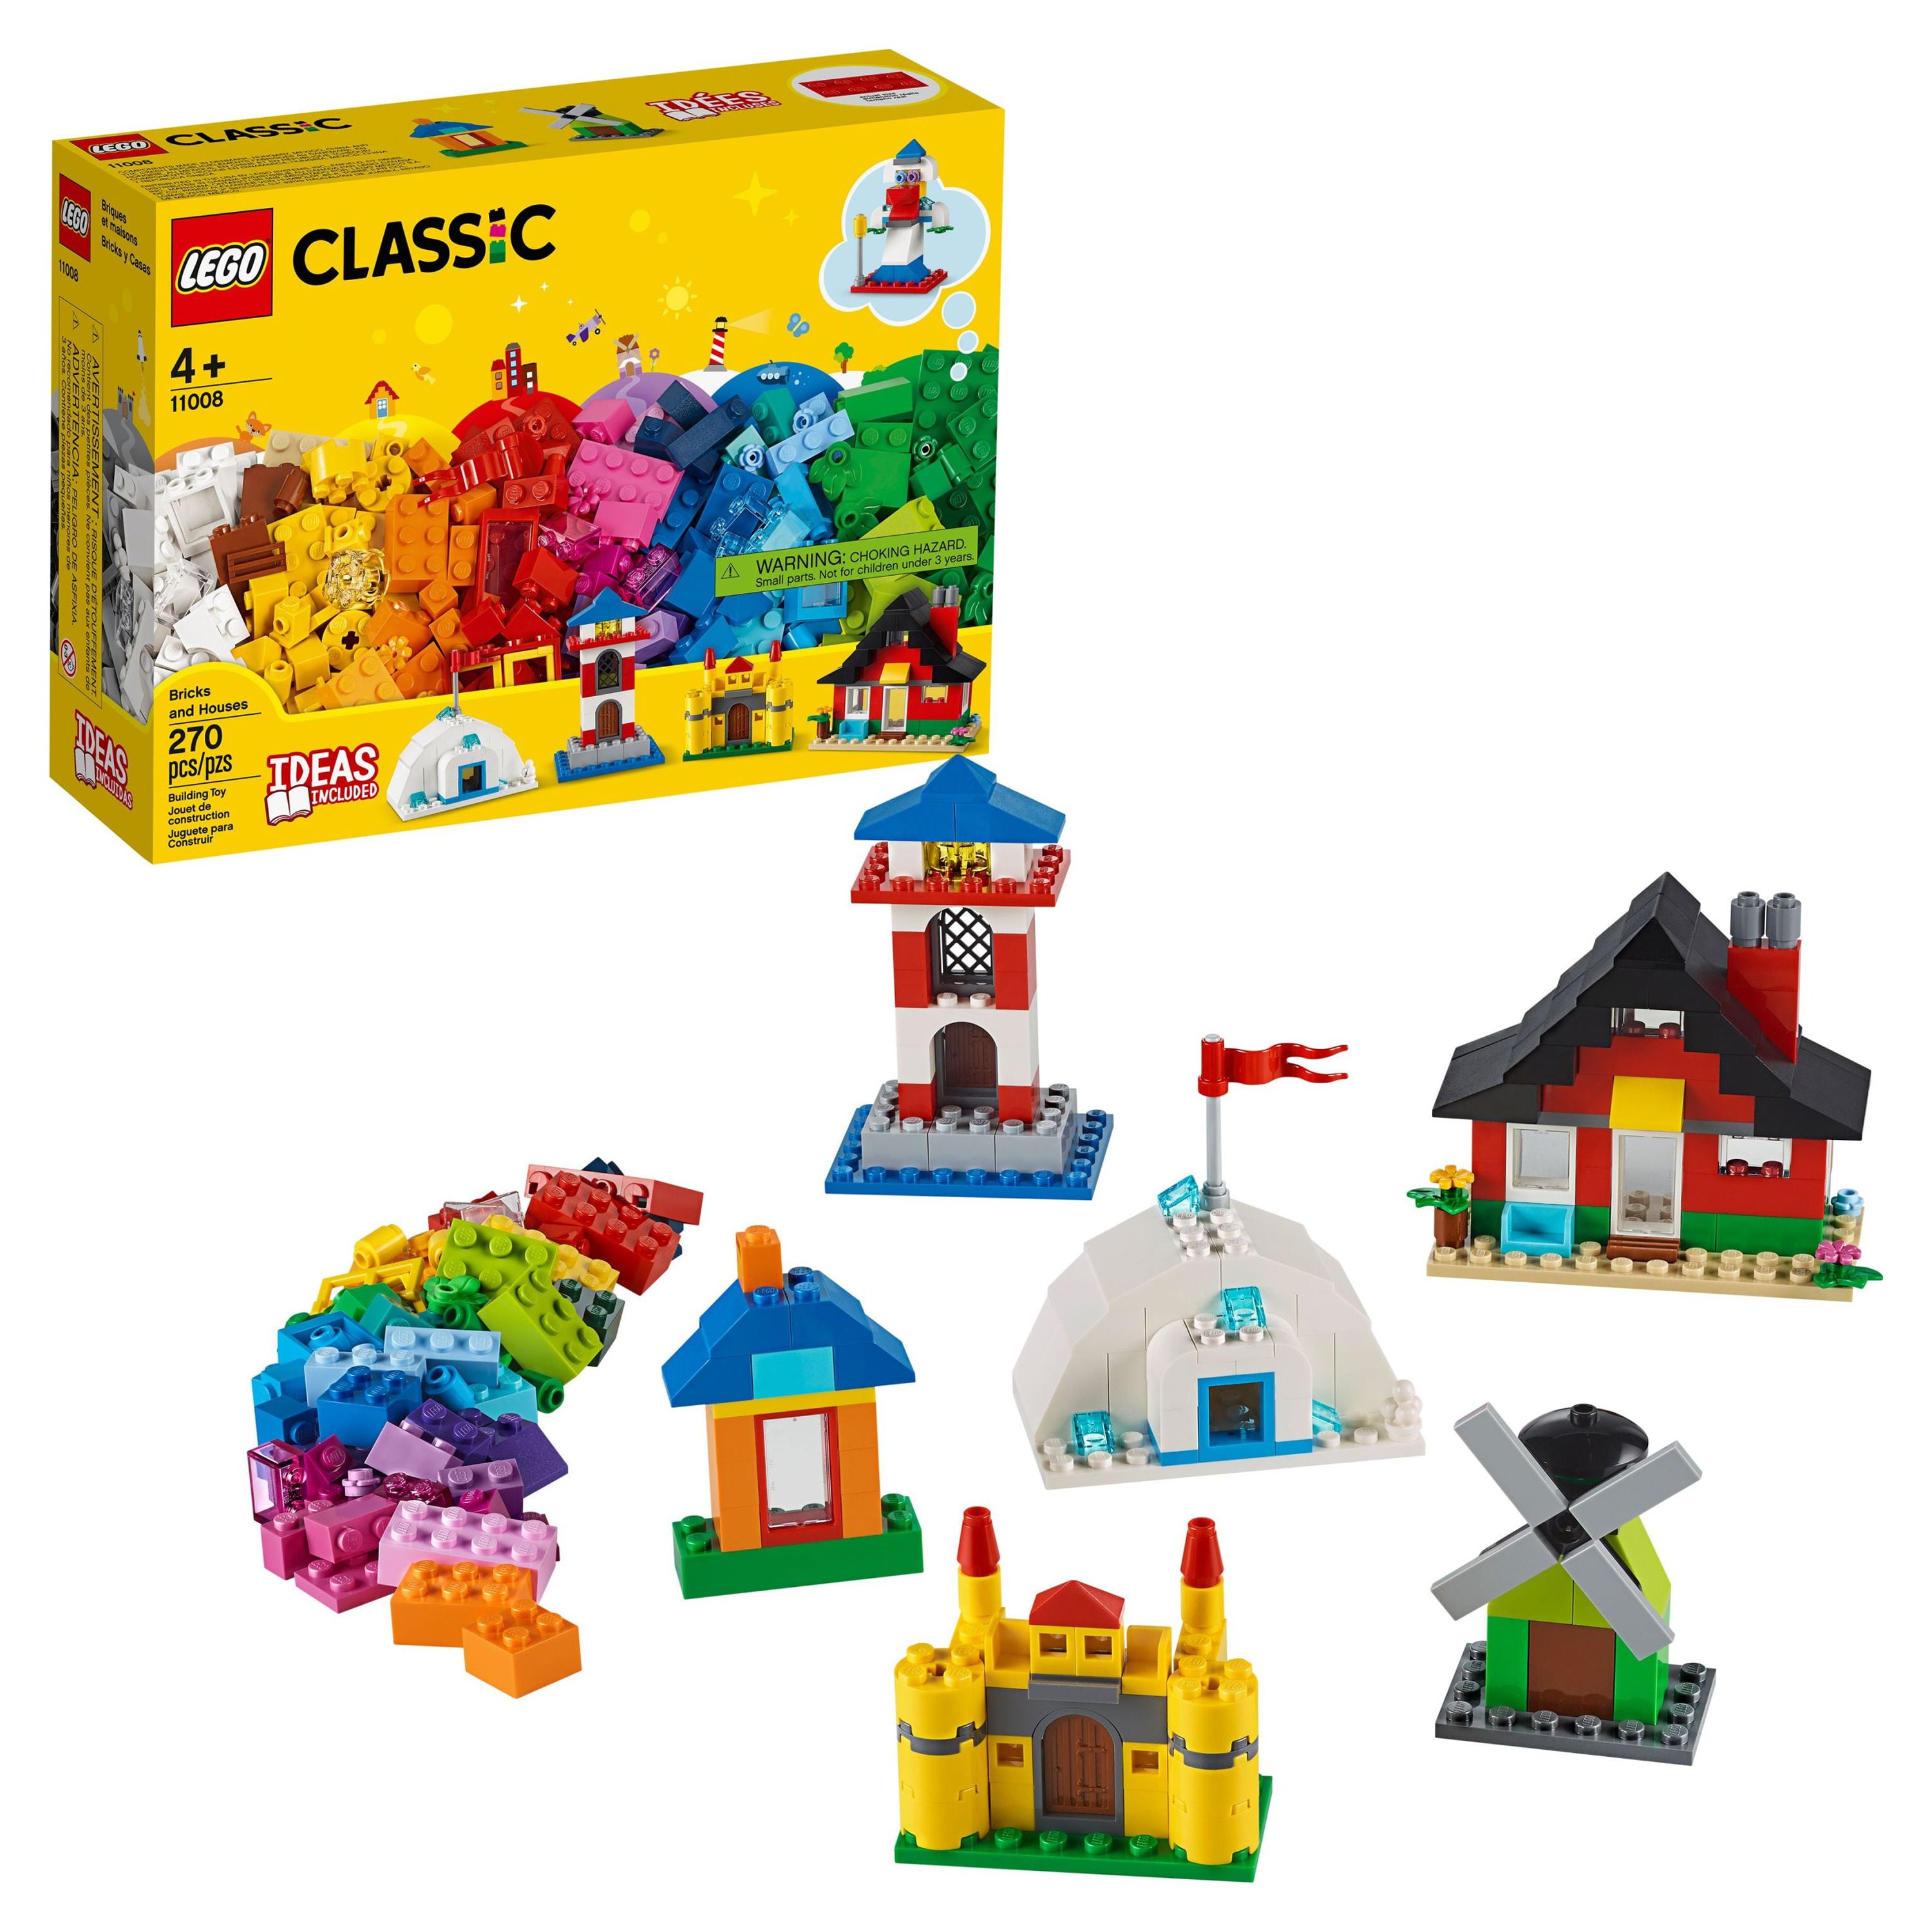 LEGO Classic Bricks and Houses 11008 Building Set for Imaginative Play (270 Pieces) - image 1 of 7